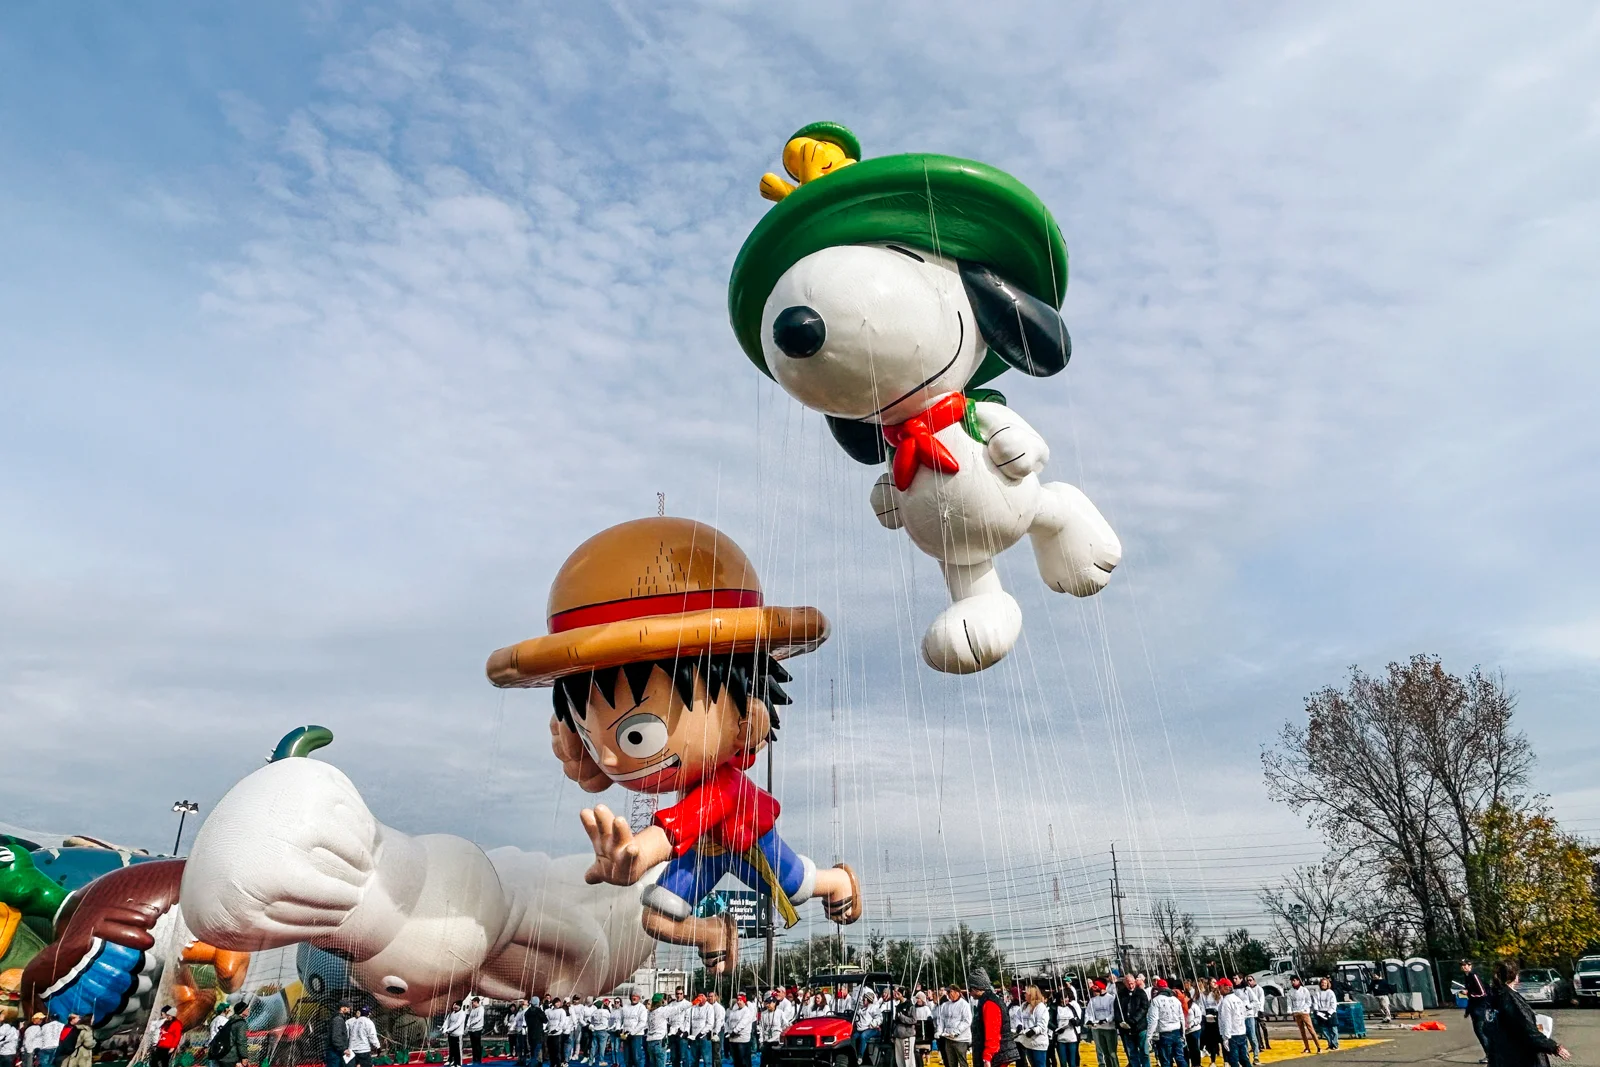 Macy’s Thanksgiving Day Parade Takes Flight With Animated Character Balloons